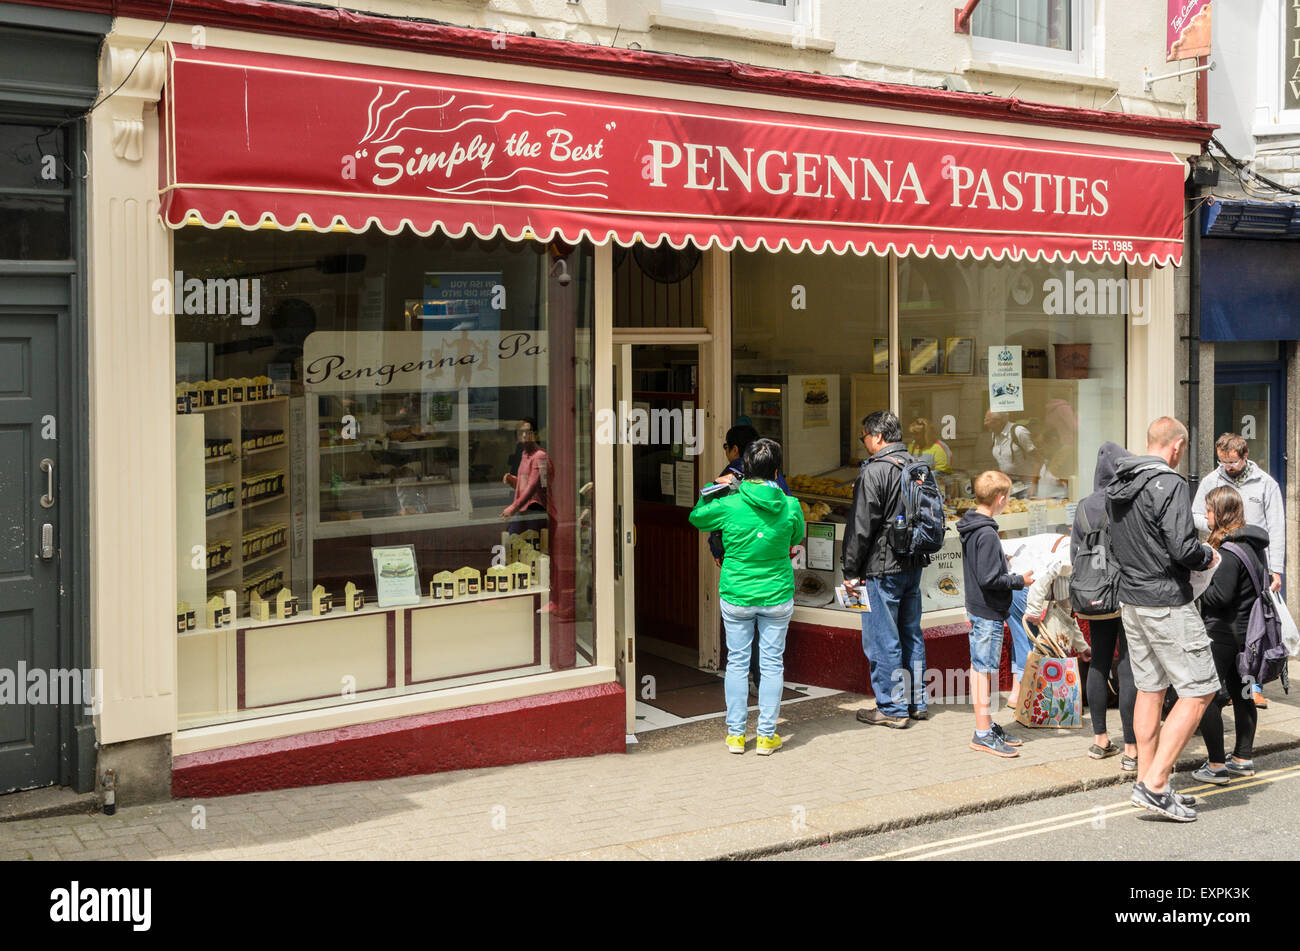 Pengenna Pasties, A Cornish Pasty Shop in St Ives, Cornwall, England, UK Stock Photo